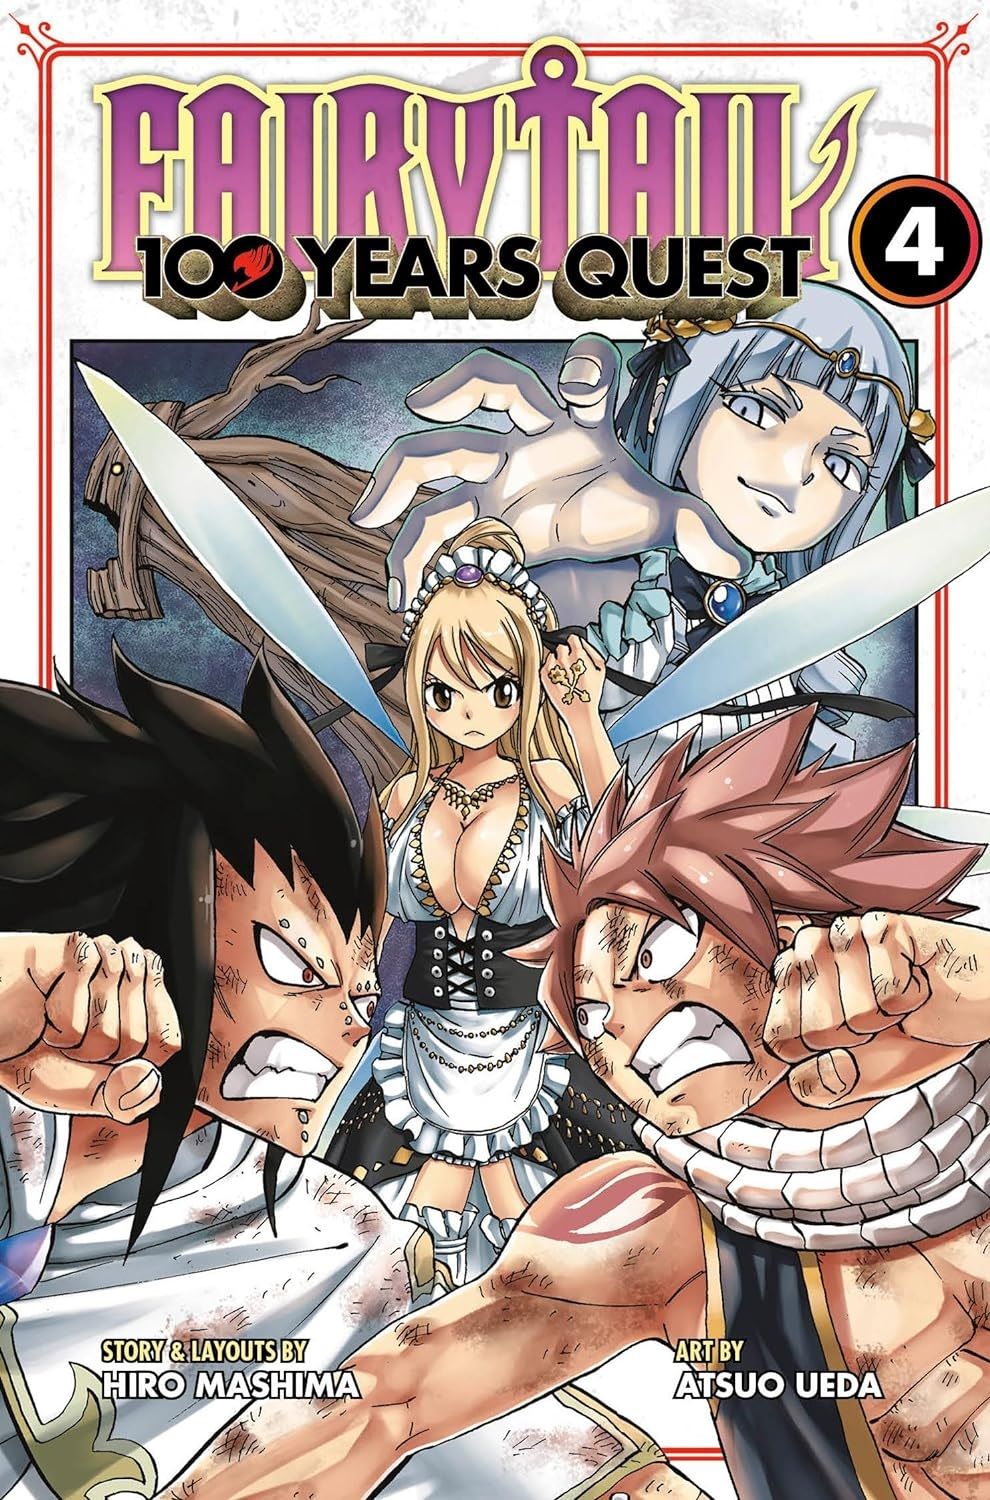 What Will the Fairy Tail 100 Years Quest Anime Adaptation Look Like?